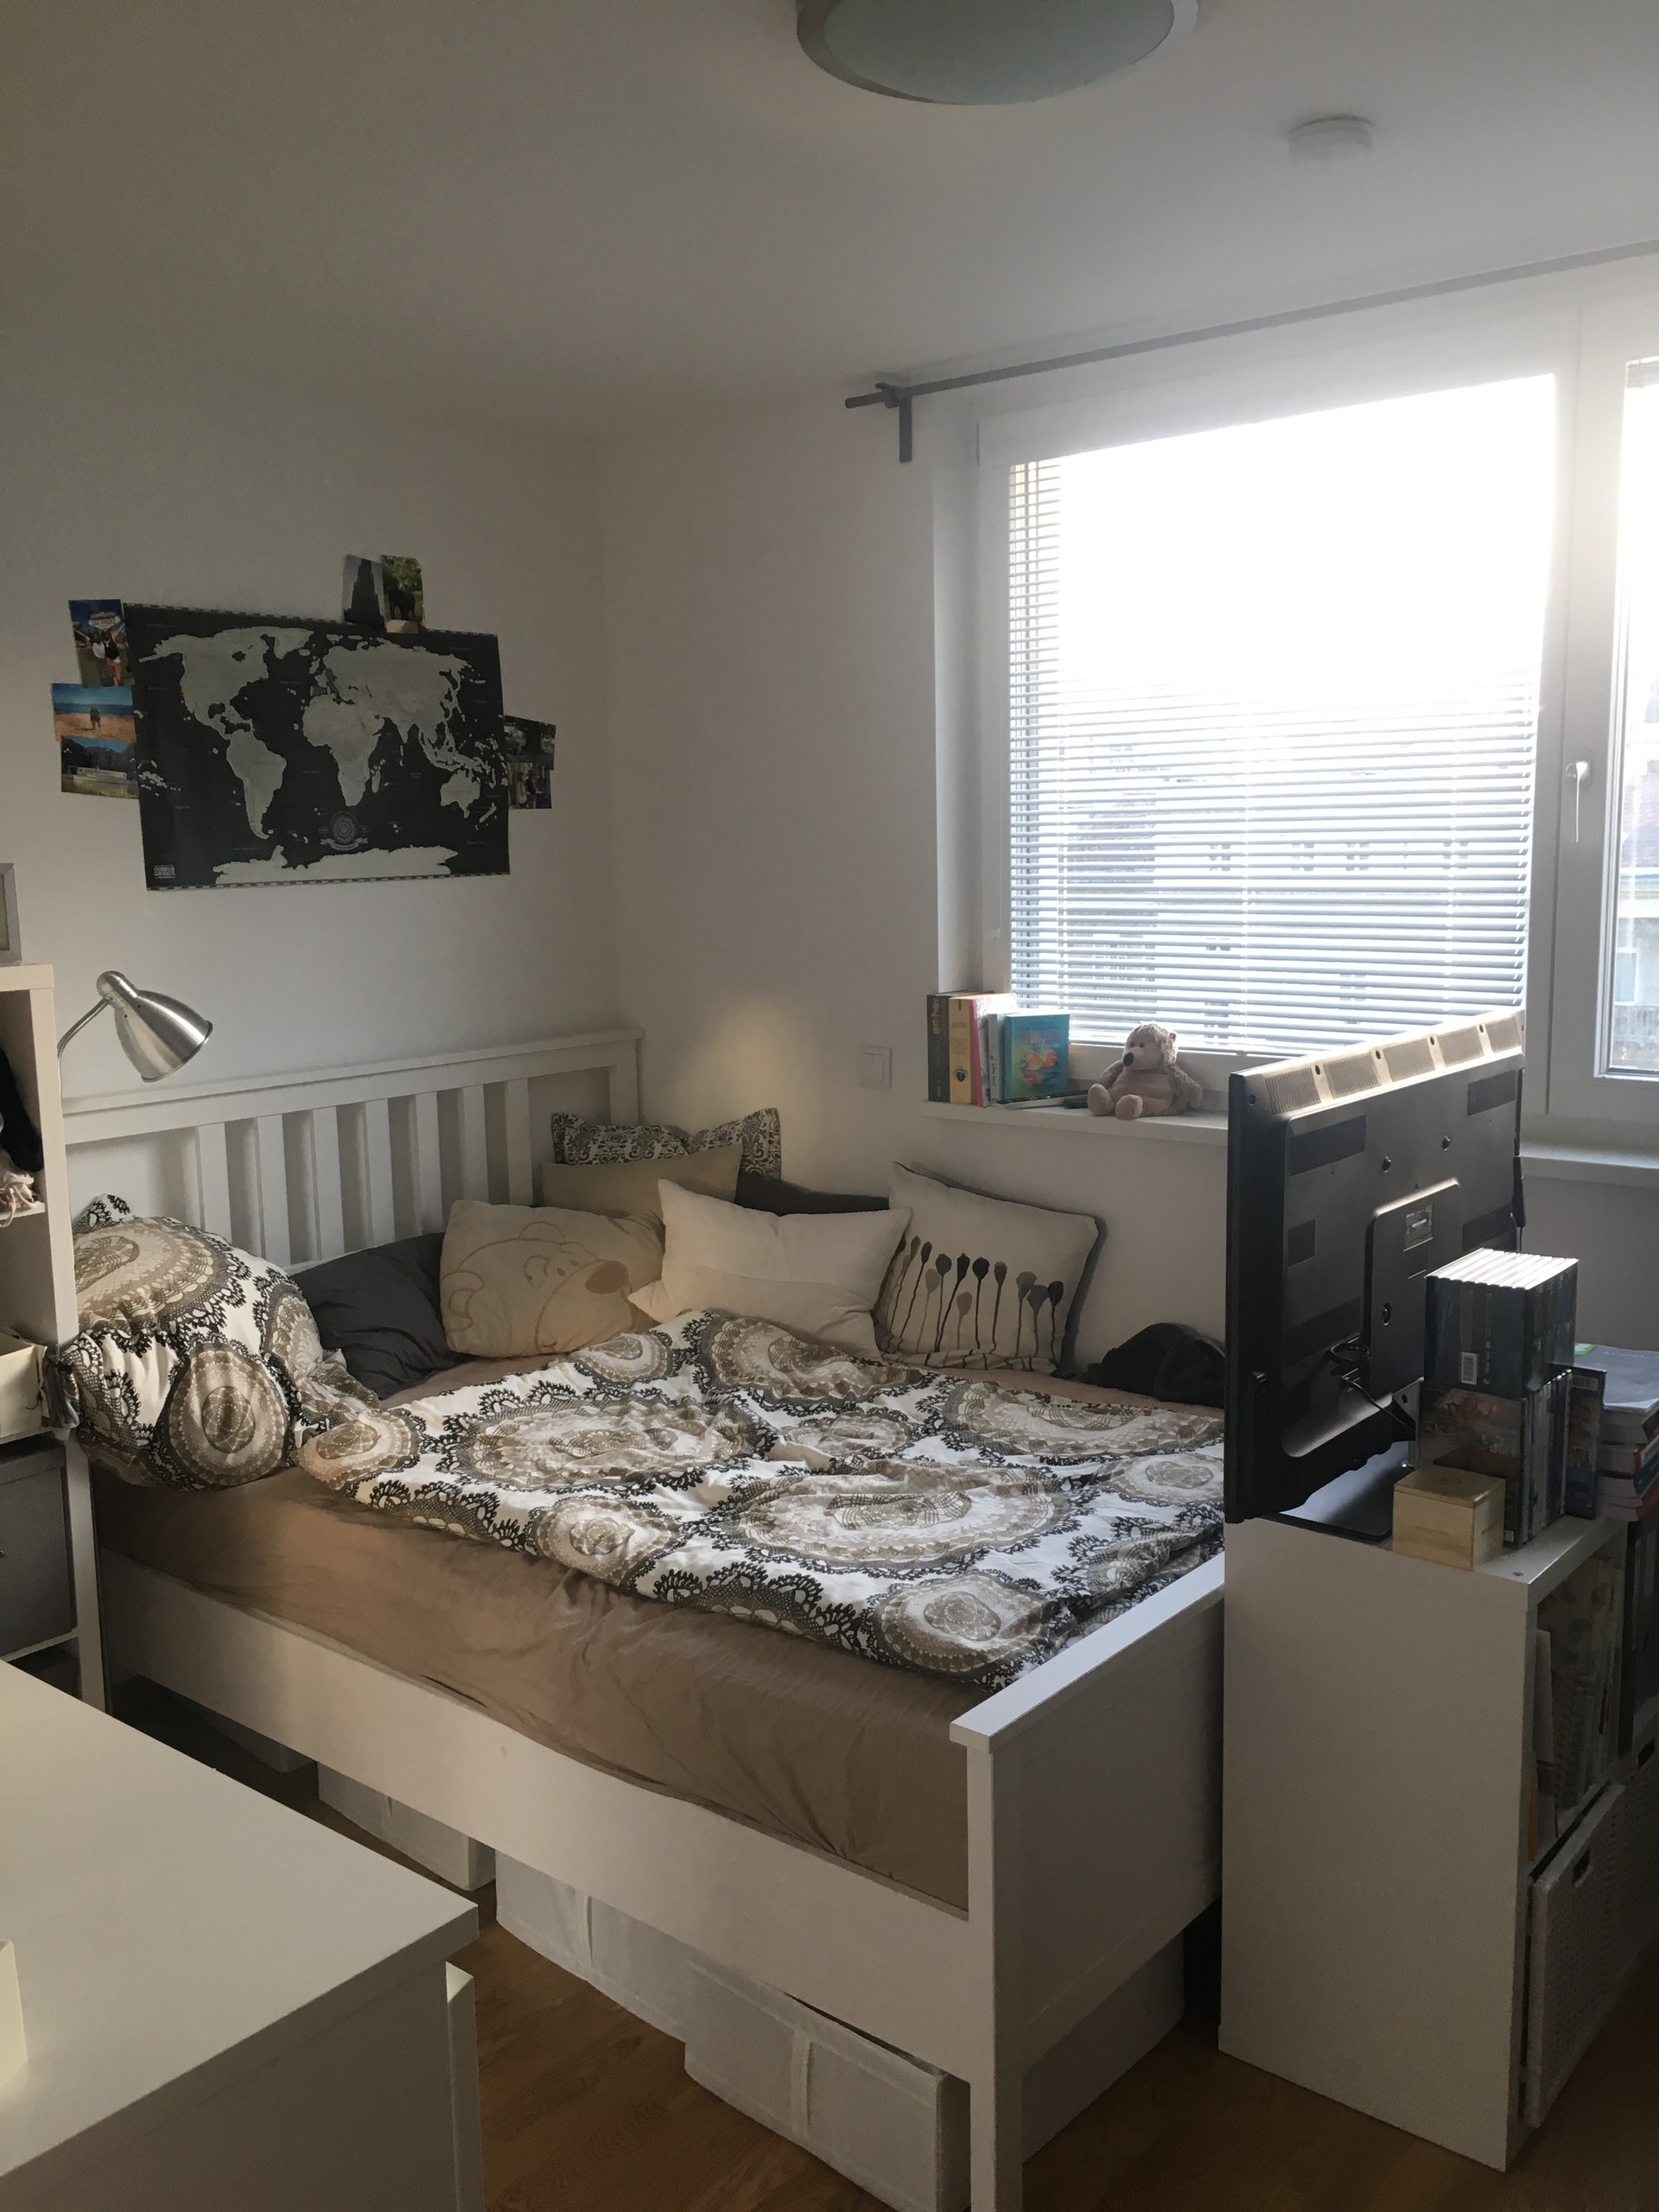 14m2 room with a balcony | Room for rent Vienna